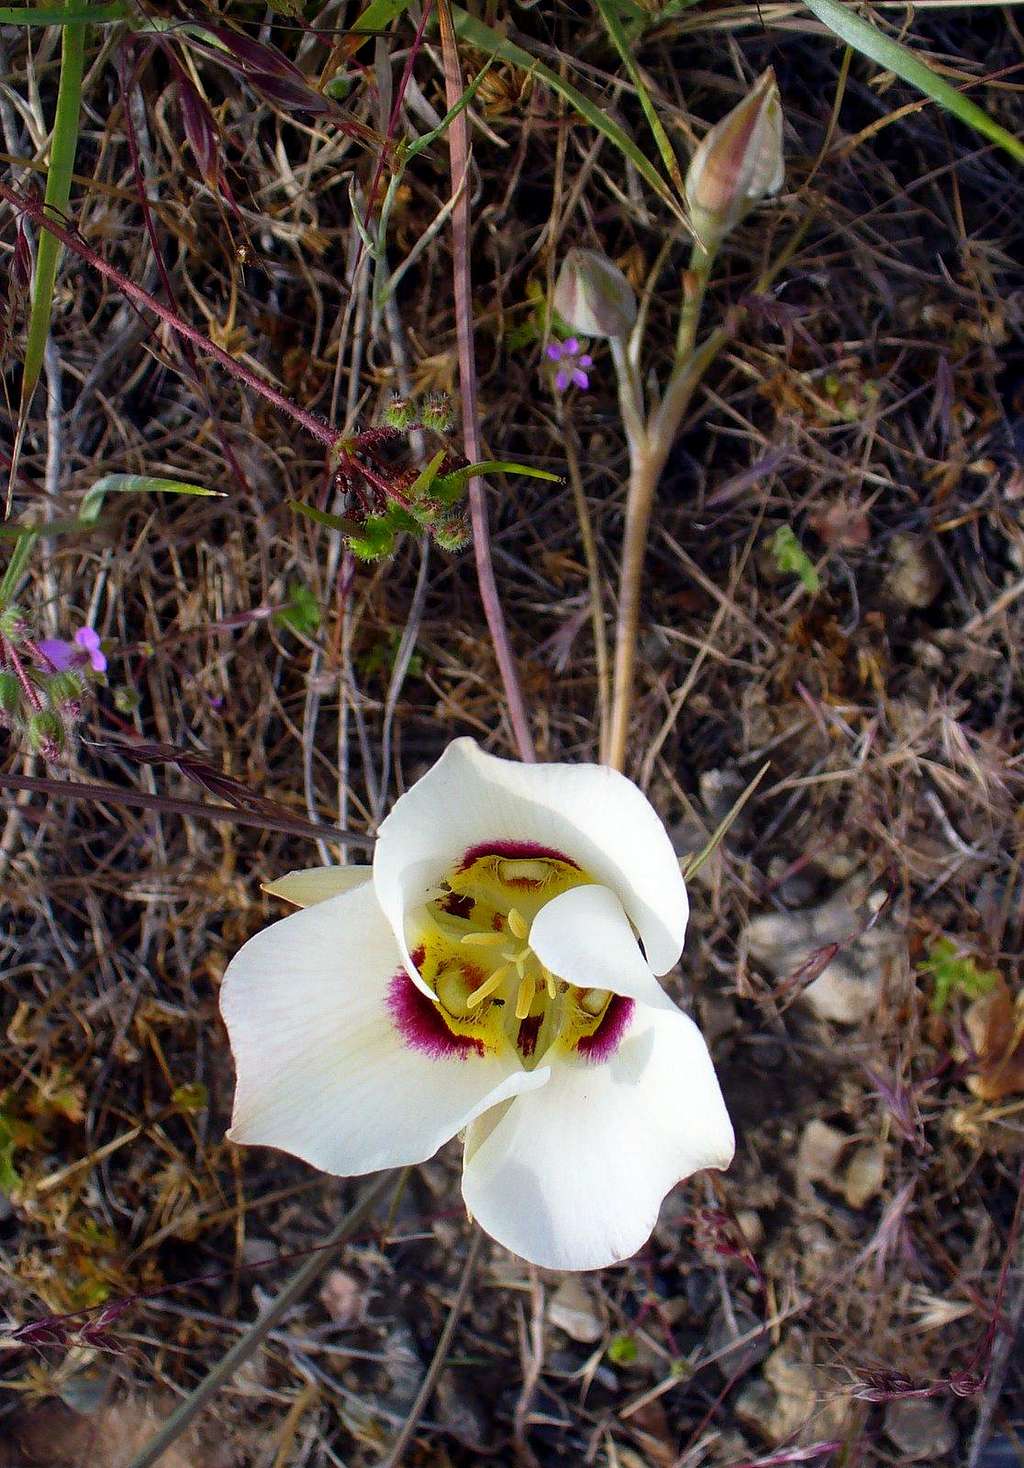 Sego Lily flower and buds